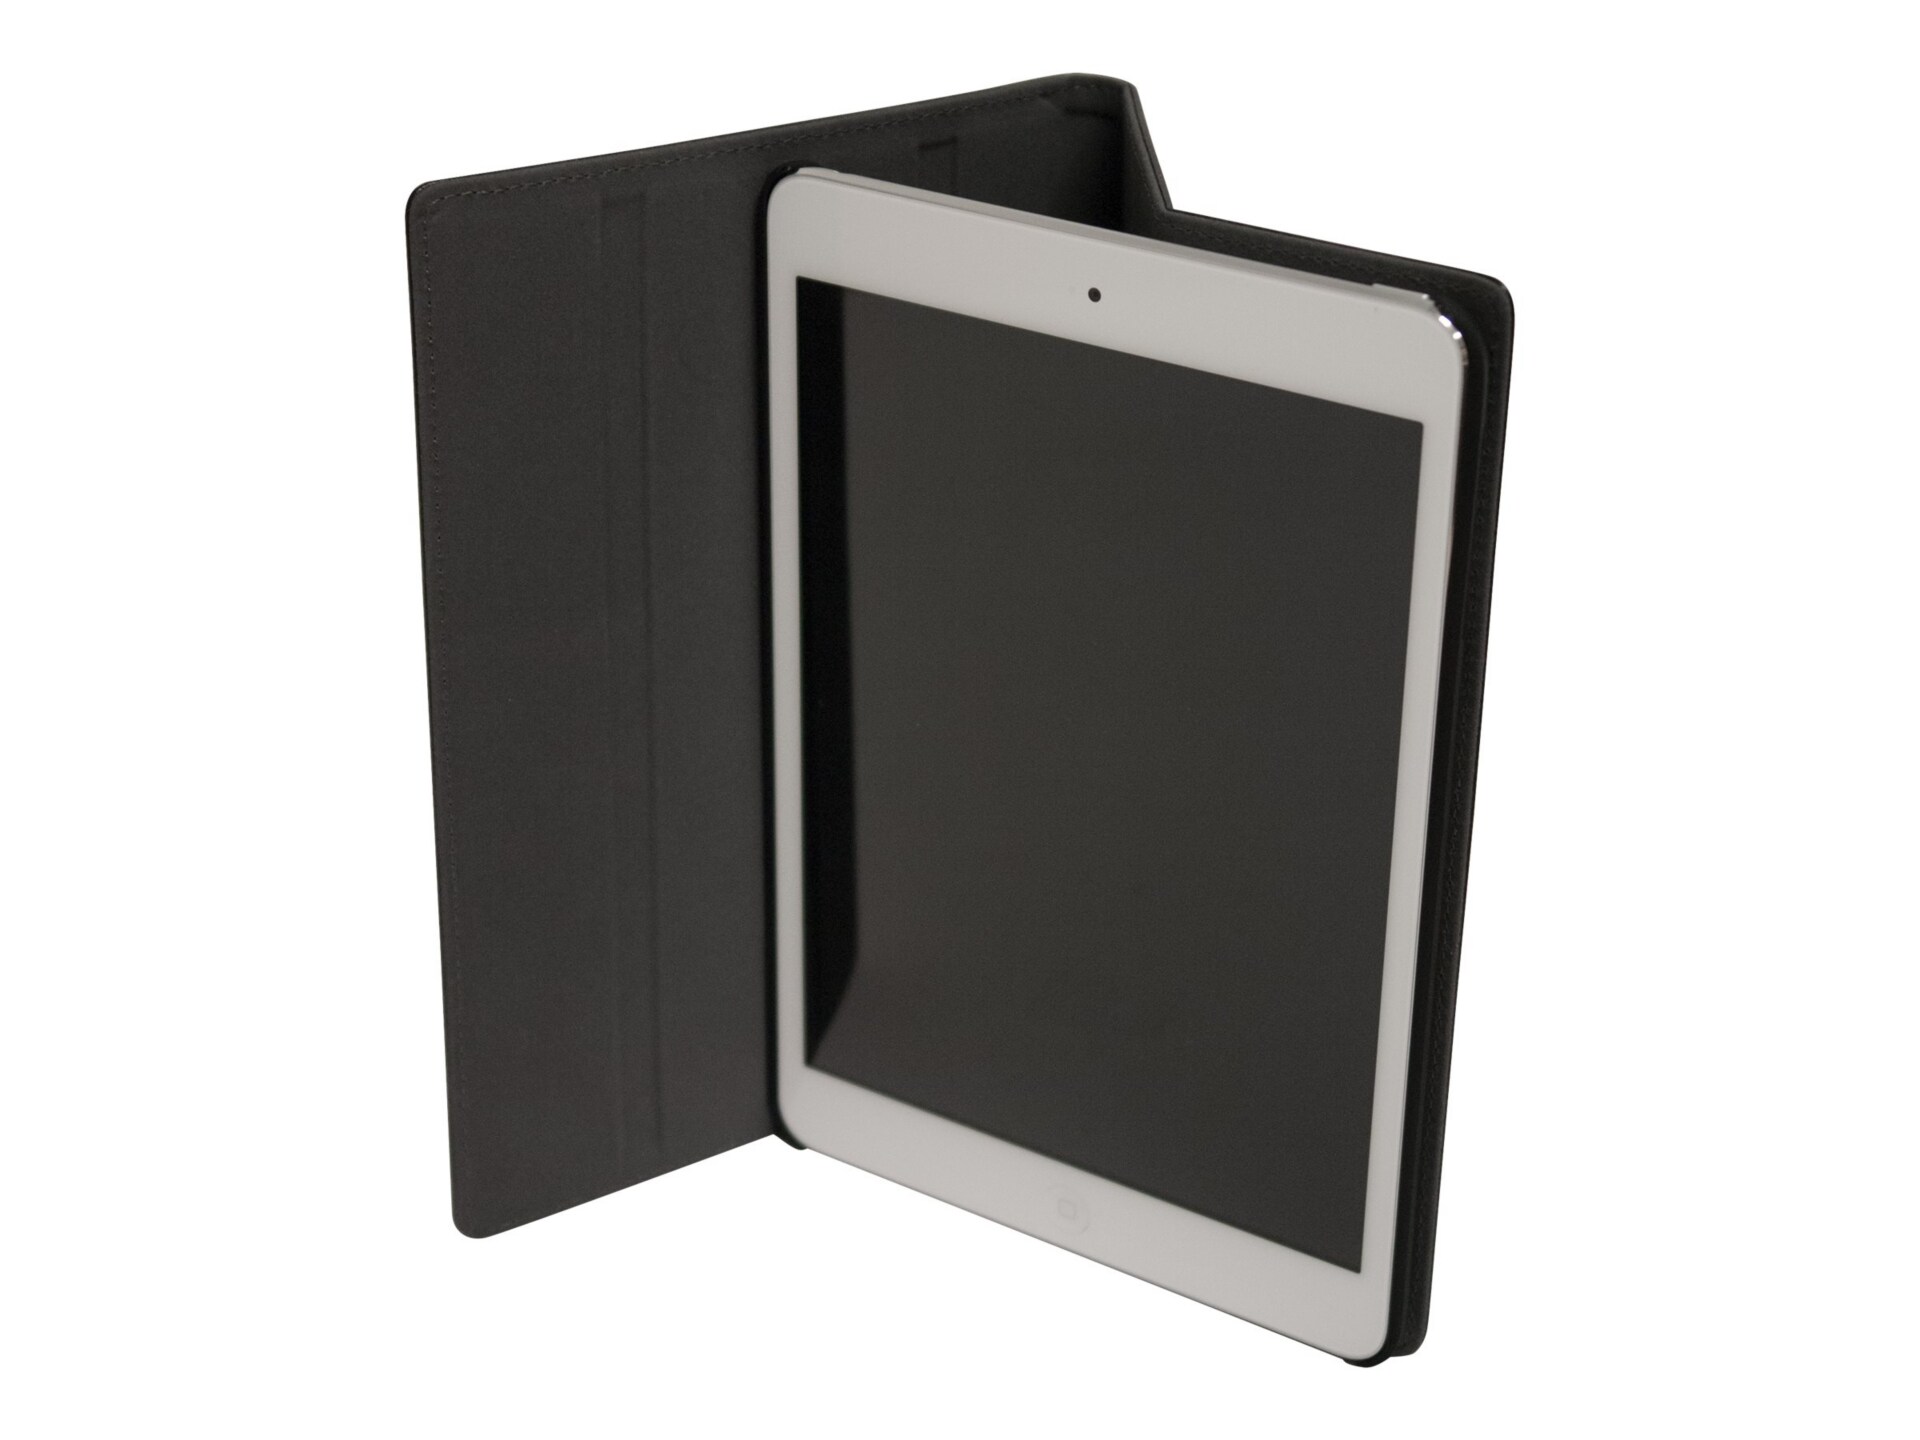 Mobile Edge SlimFit iPad Air Case/Stand - protective cover for tablet